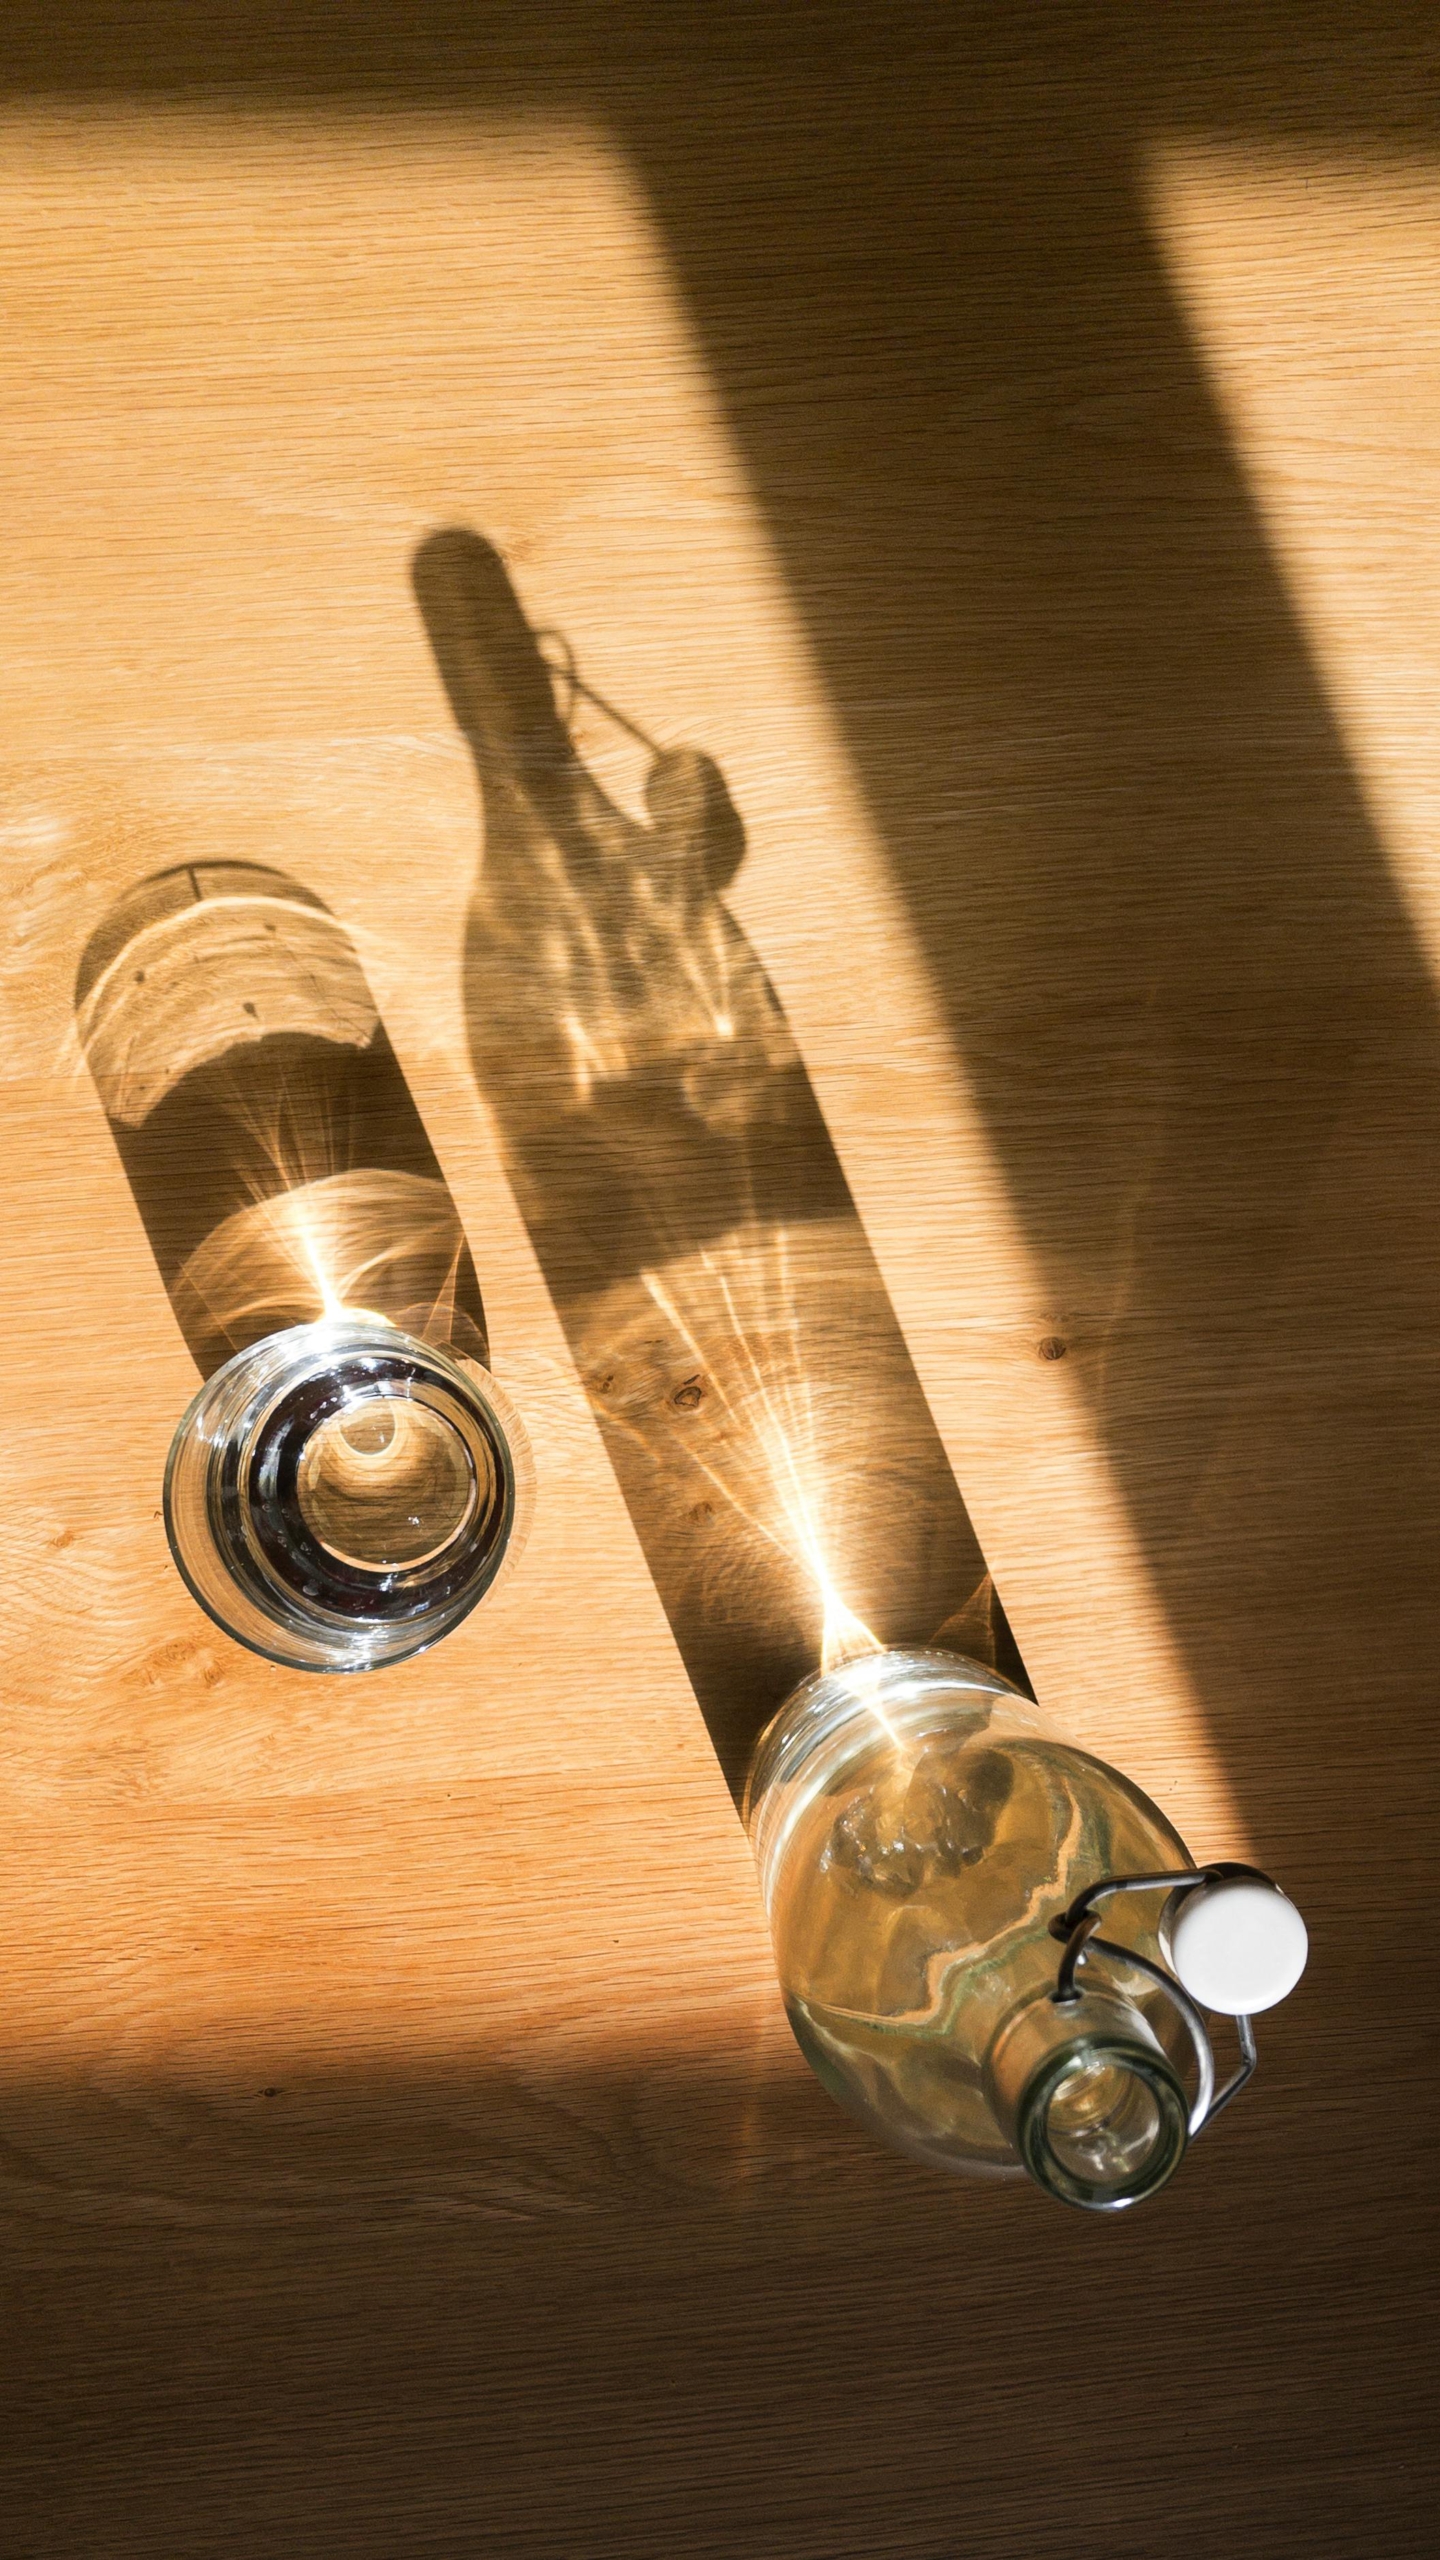 A glass bottle and drinking glass cast a shadow on a sunny wooden table.